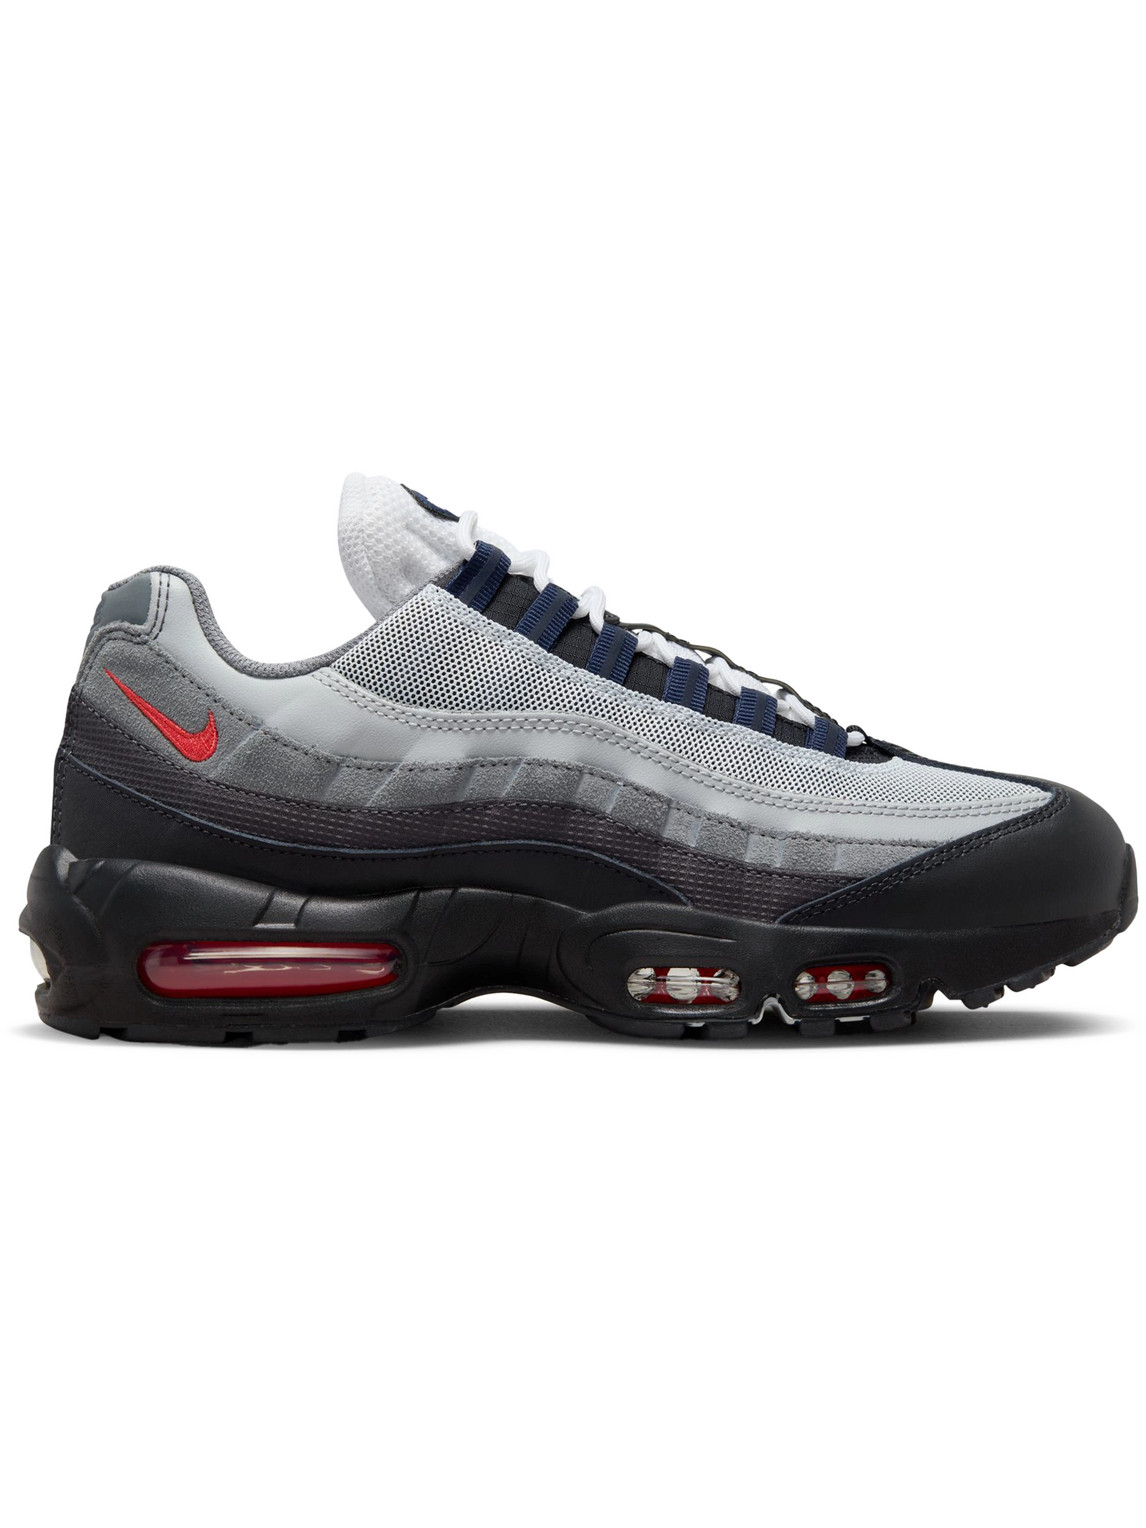 Nike Air Max 95 Essential Trainer In Black/track Red-anthracite | ModeSens